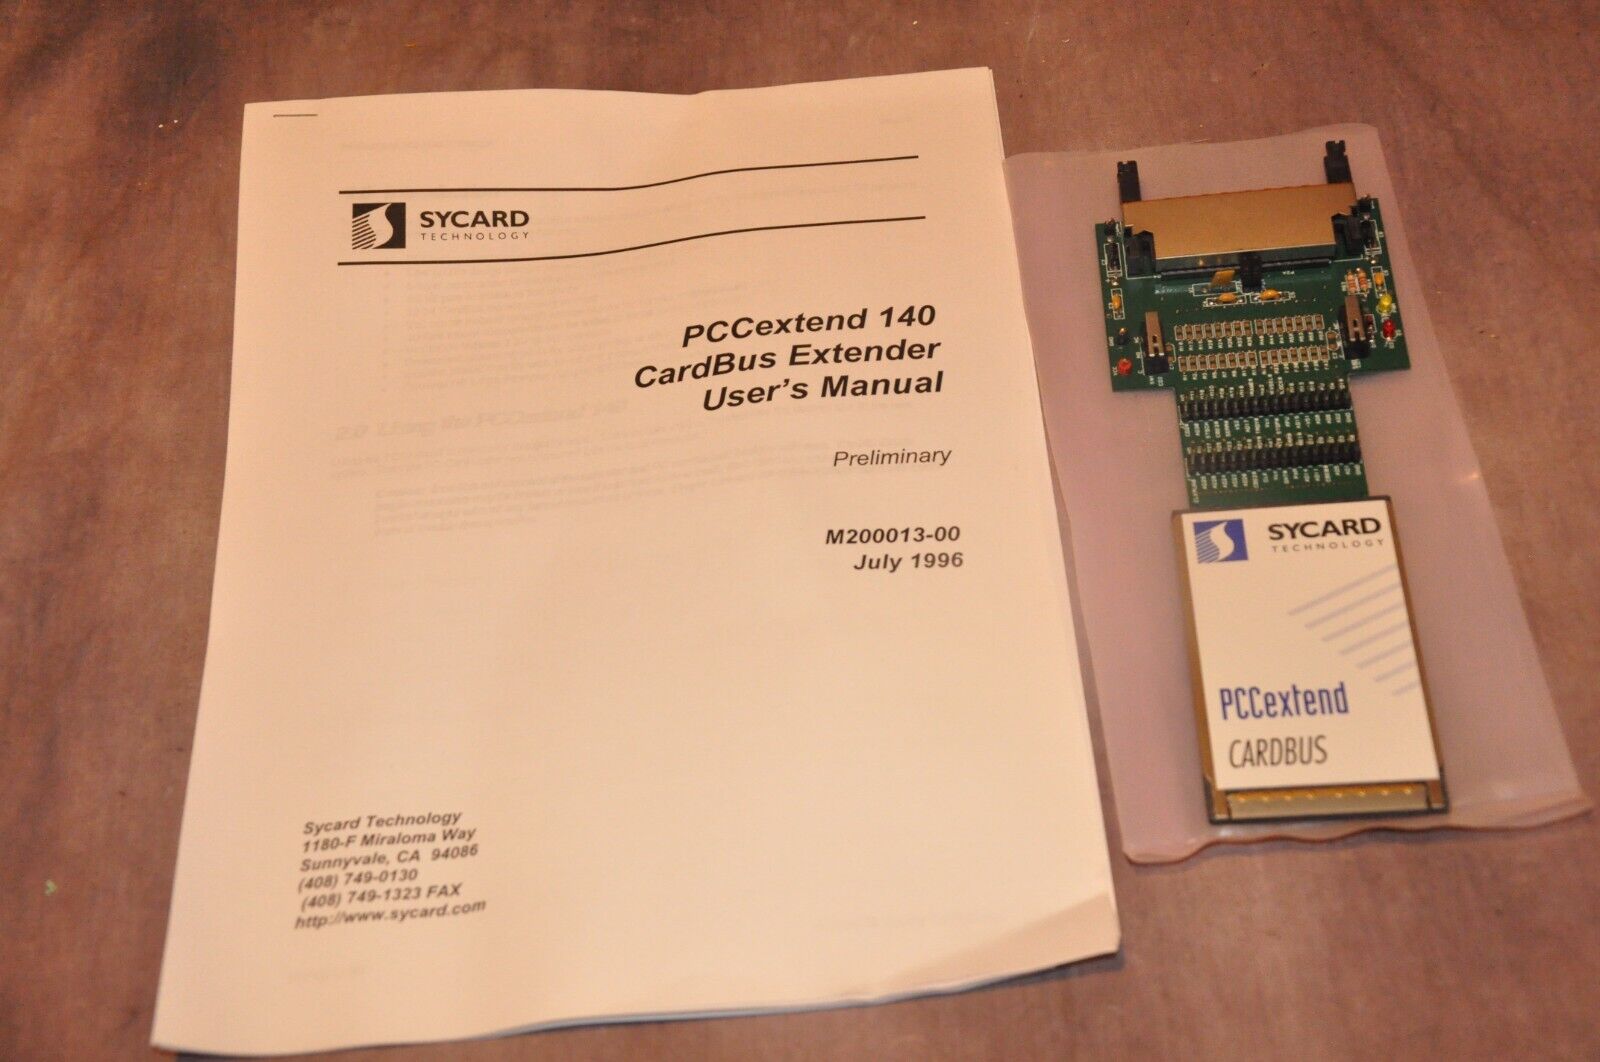 Sycard Technology PCCextend 140/140A CardBus Extender Card. Available Now for 289.00